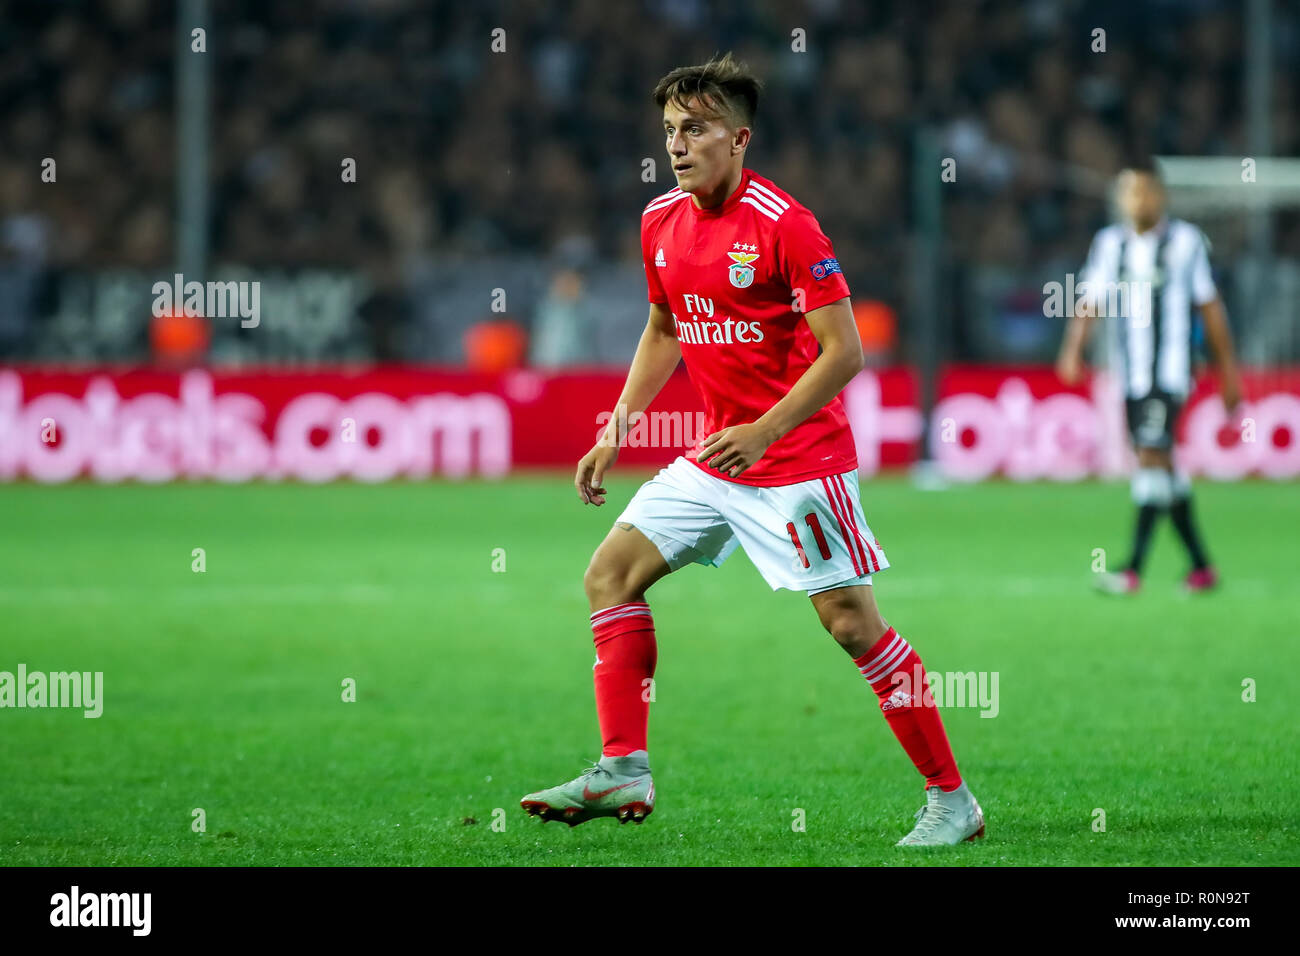 Thessaloniki, Greece - August 29, 2018: Player of Benfica Franco Cervi in action during the UEFA Champions League Play-offs , 2nd leg PAOK vs FC Benfi Stock Photo